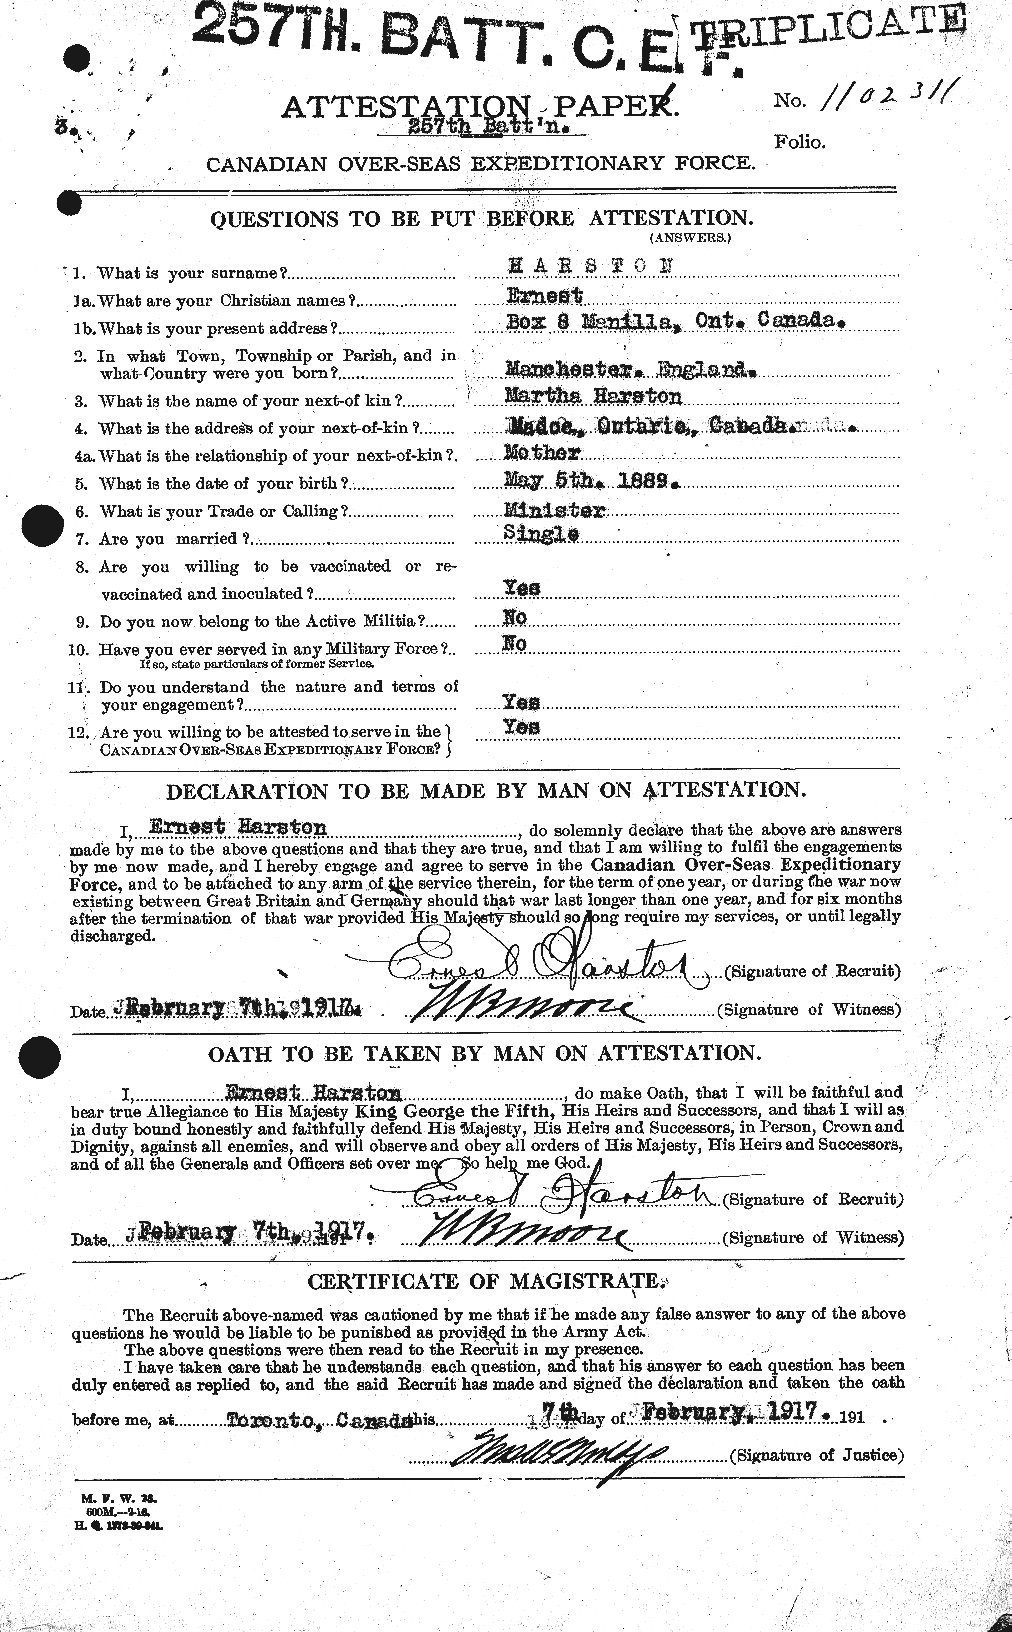 Personnel Records of the First World War - CEF 381783a